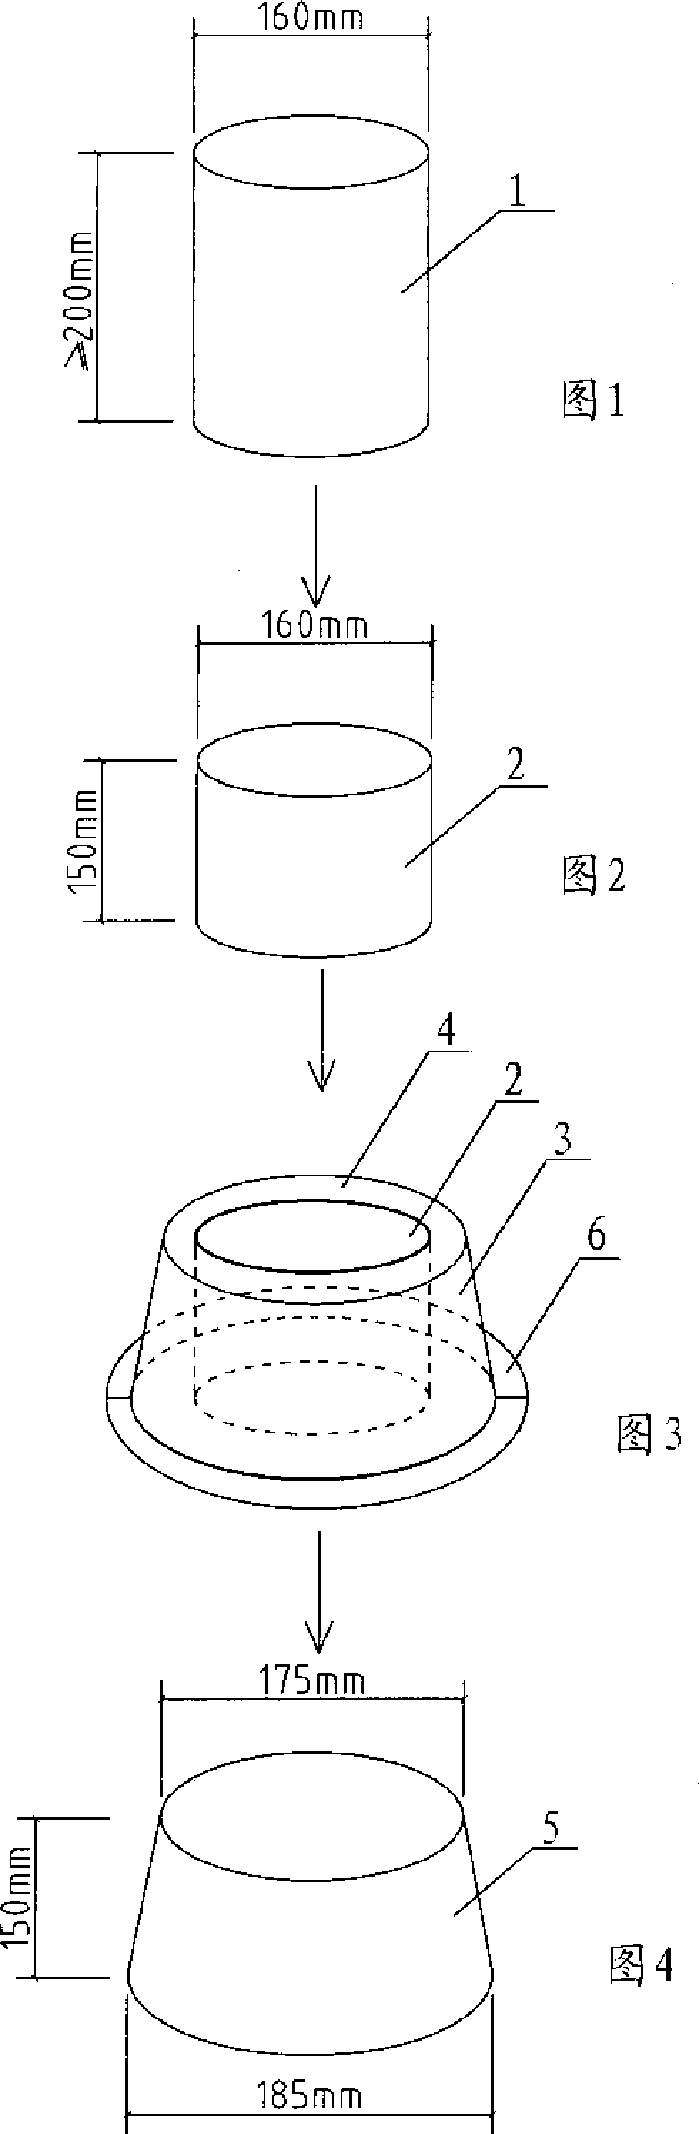 Method for detecting solid concrete impermeability by core boring sampling